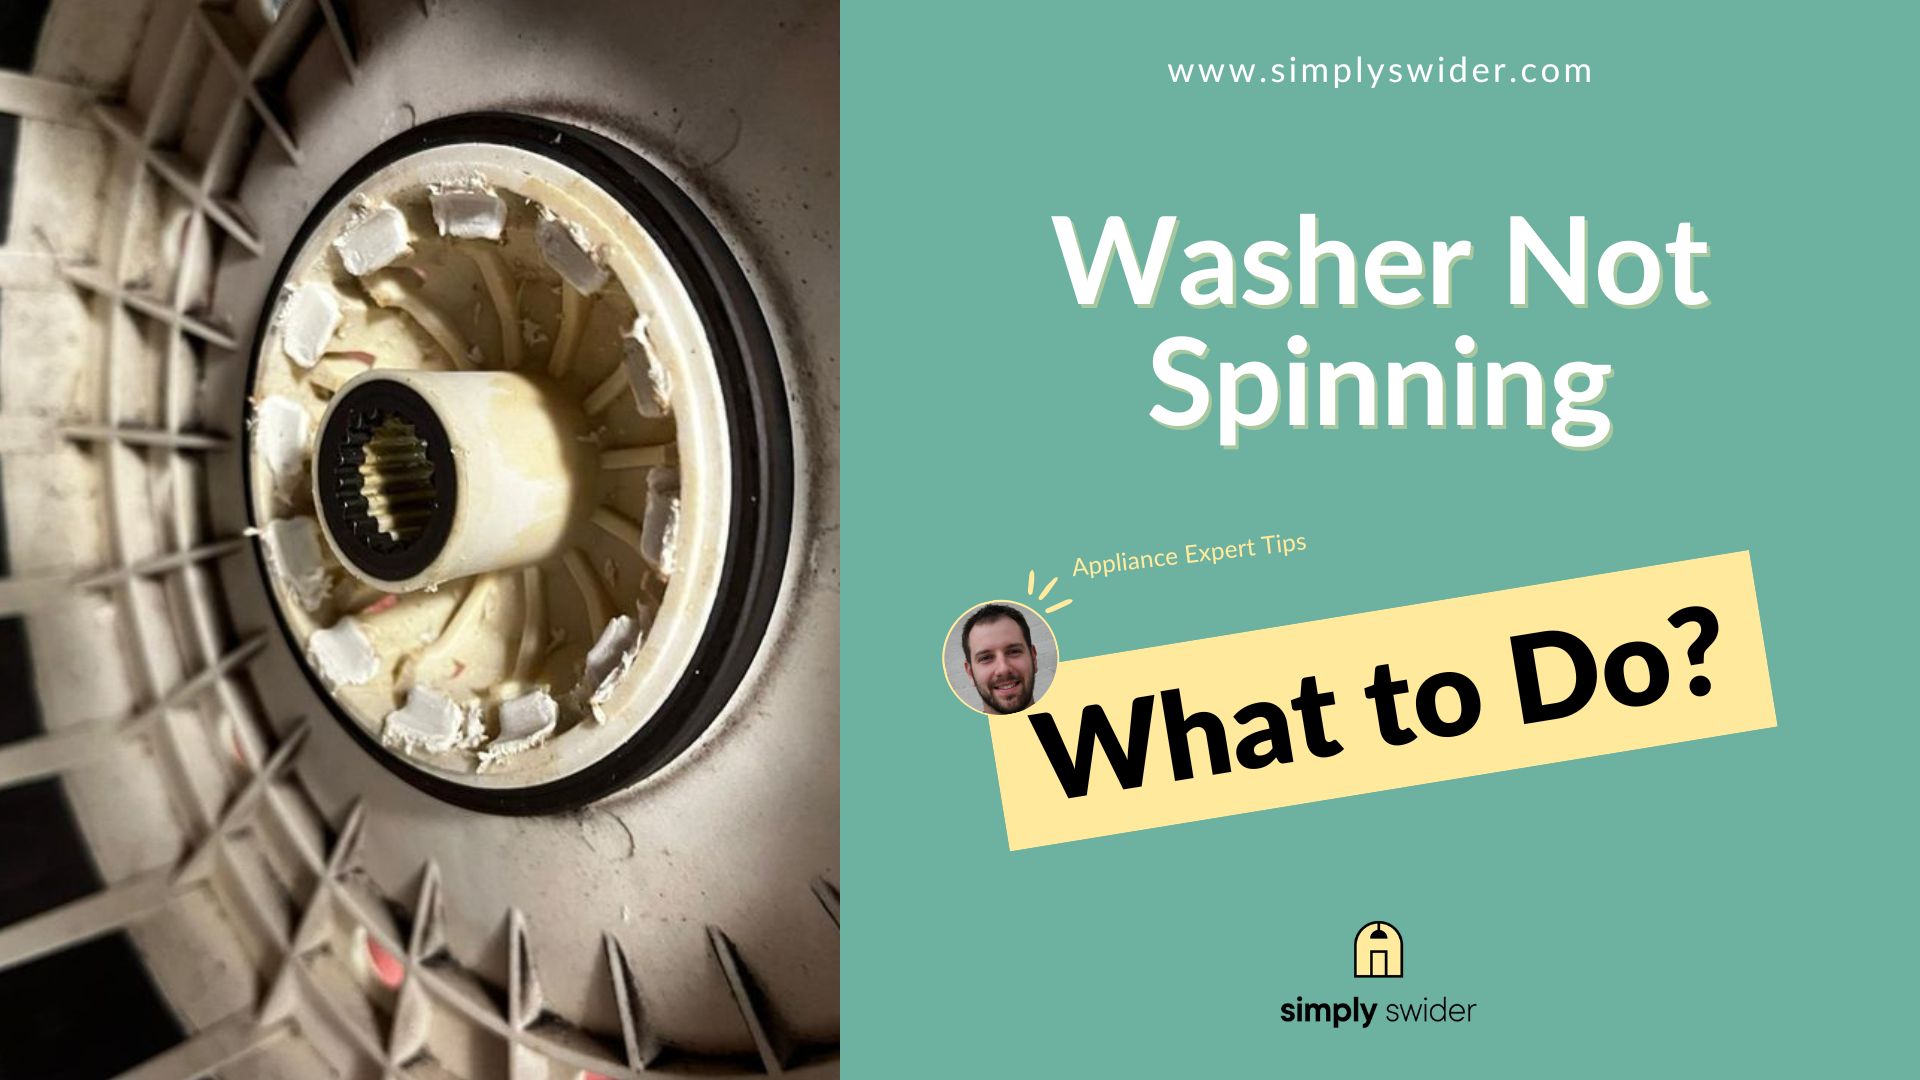 Washer Not Spinning